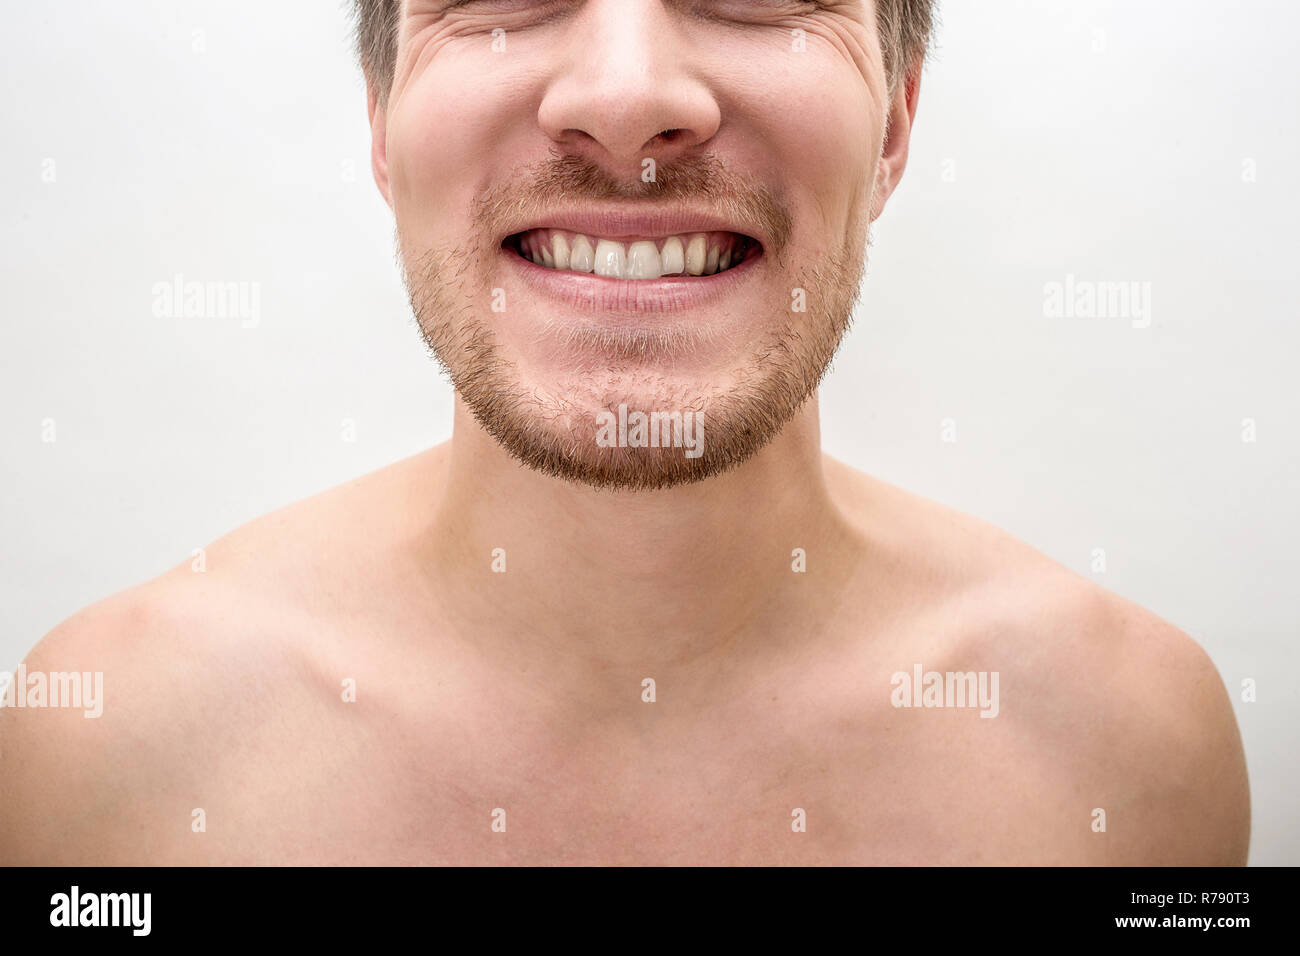 Cut virew of young man smiling. He shows healthy white teeth. Isolated on white baclground. Close up. Stock Photo